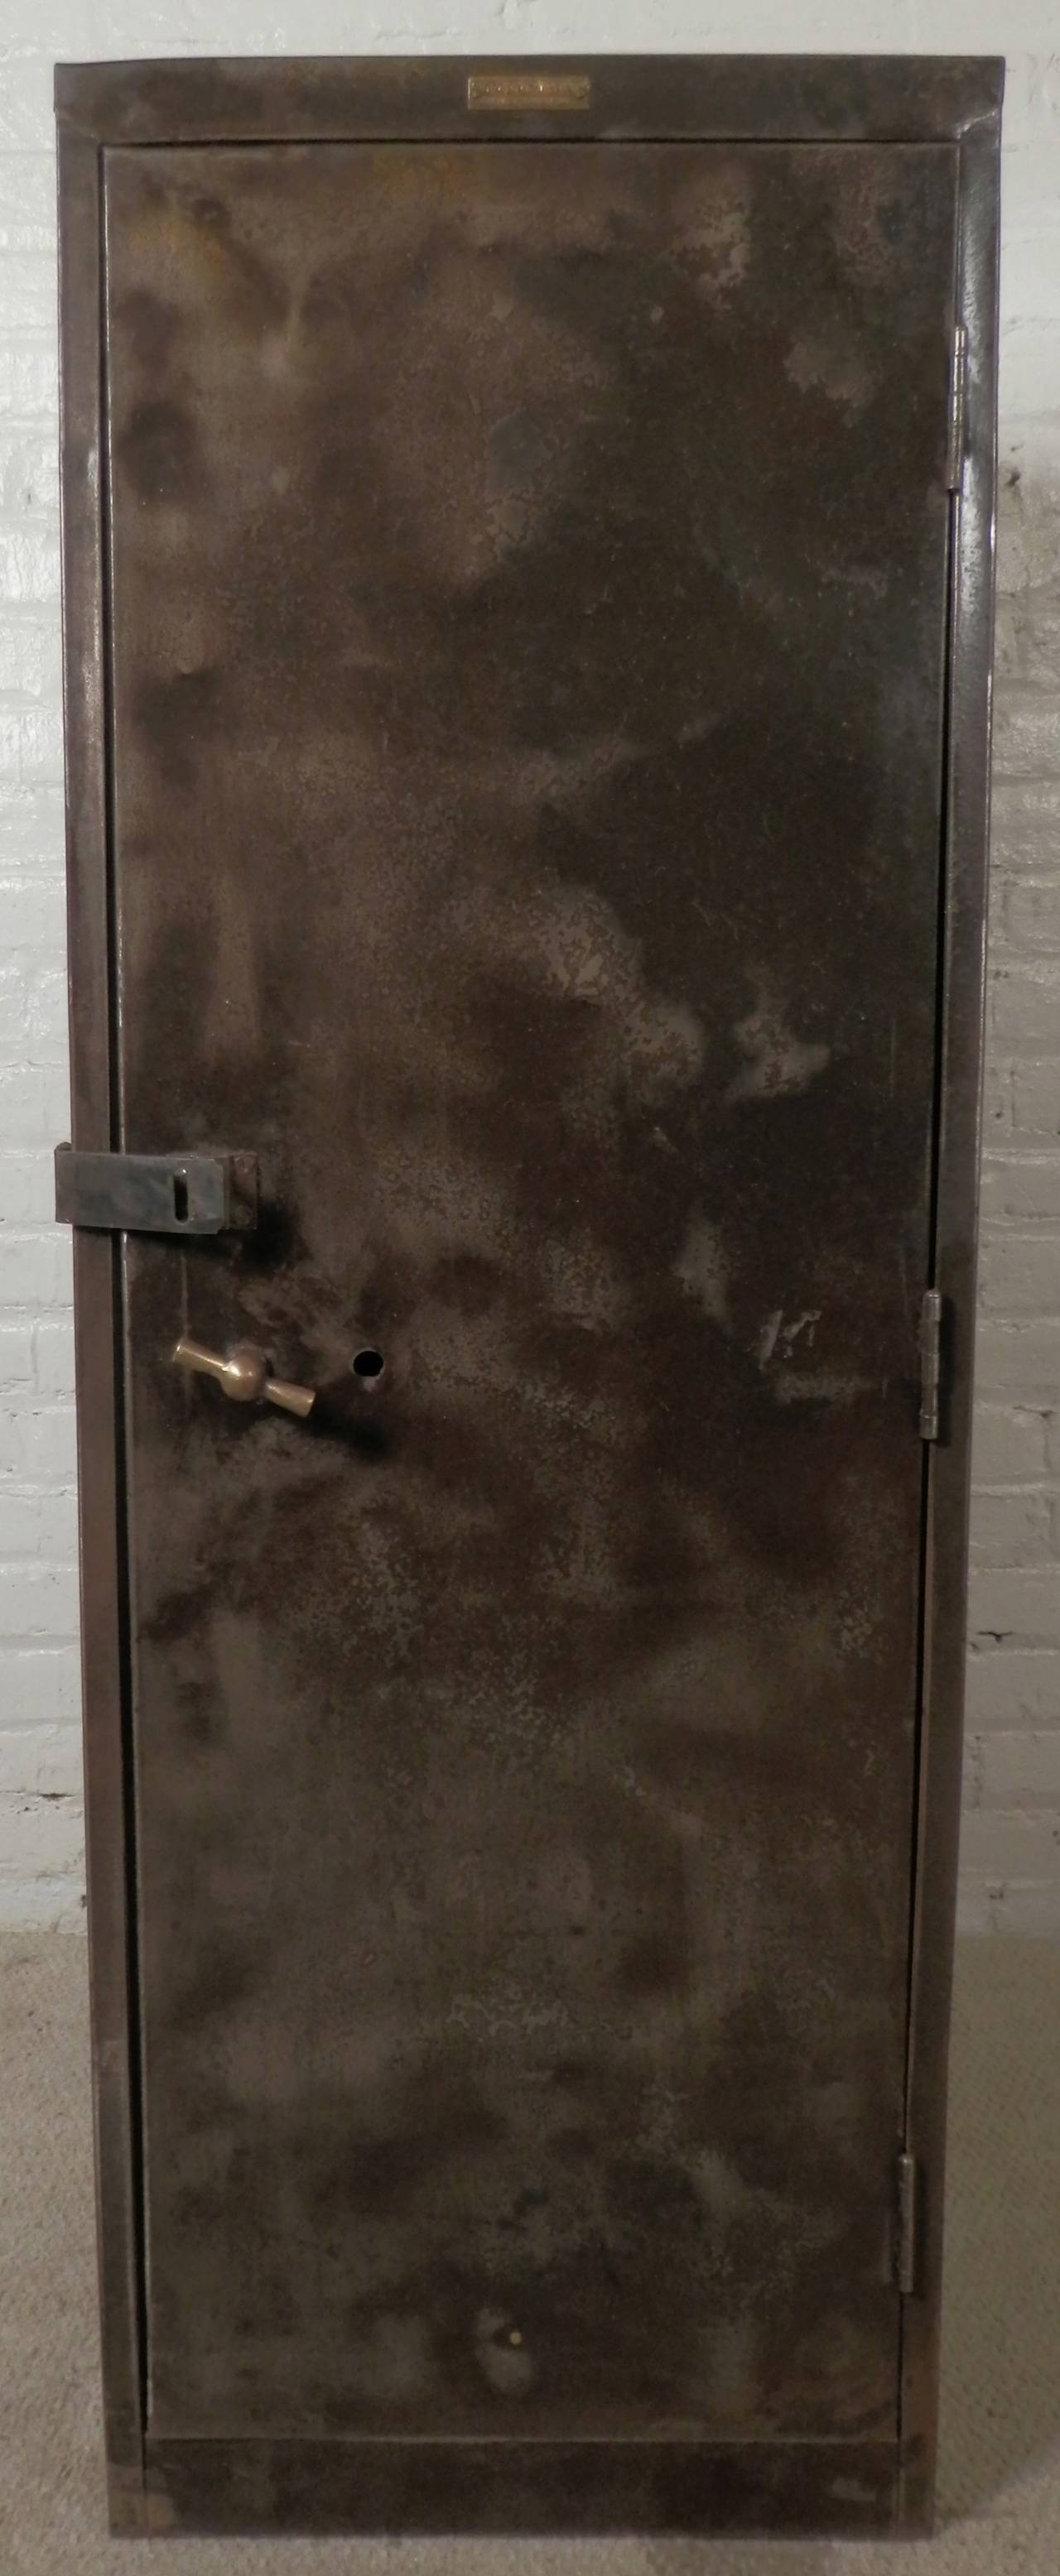 Industrial cabinet featuring one large door with latch and brass handle, interior includes three metal shelves. Huge vintage bank safe style, with great wear that adds character. 

(Please confirm item location - NY or NJ - with dealer)